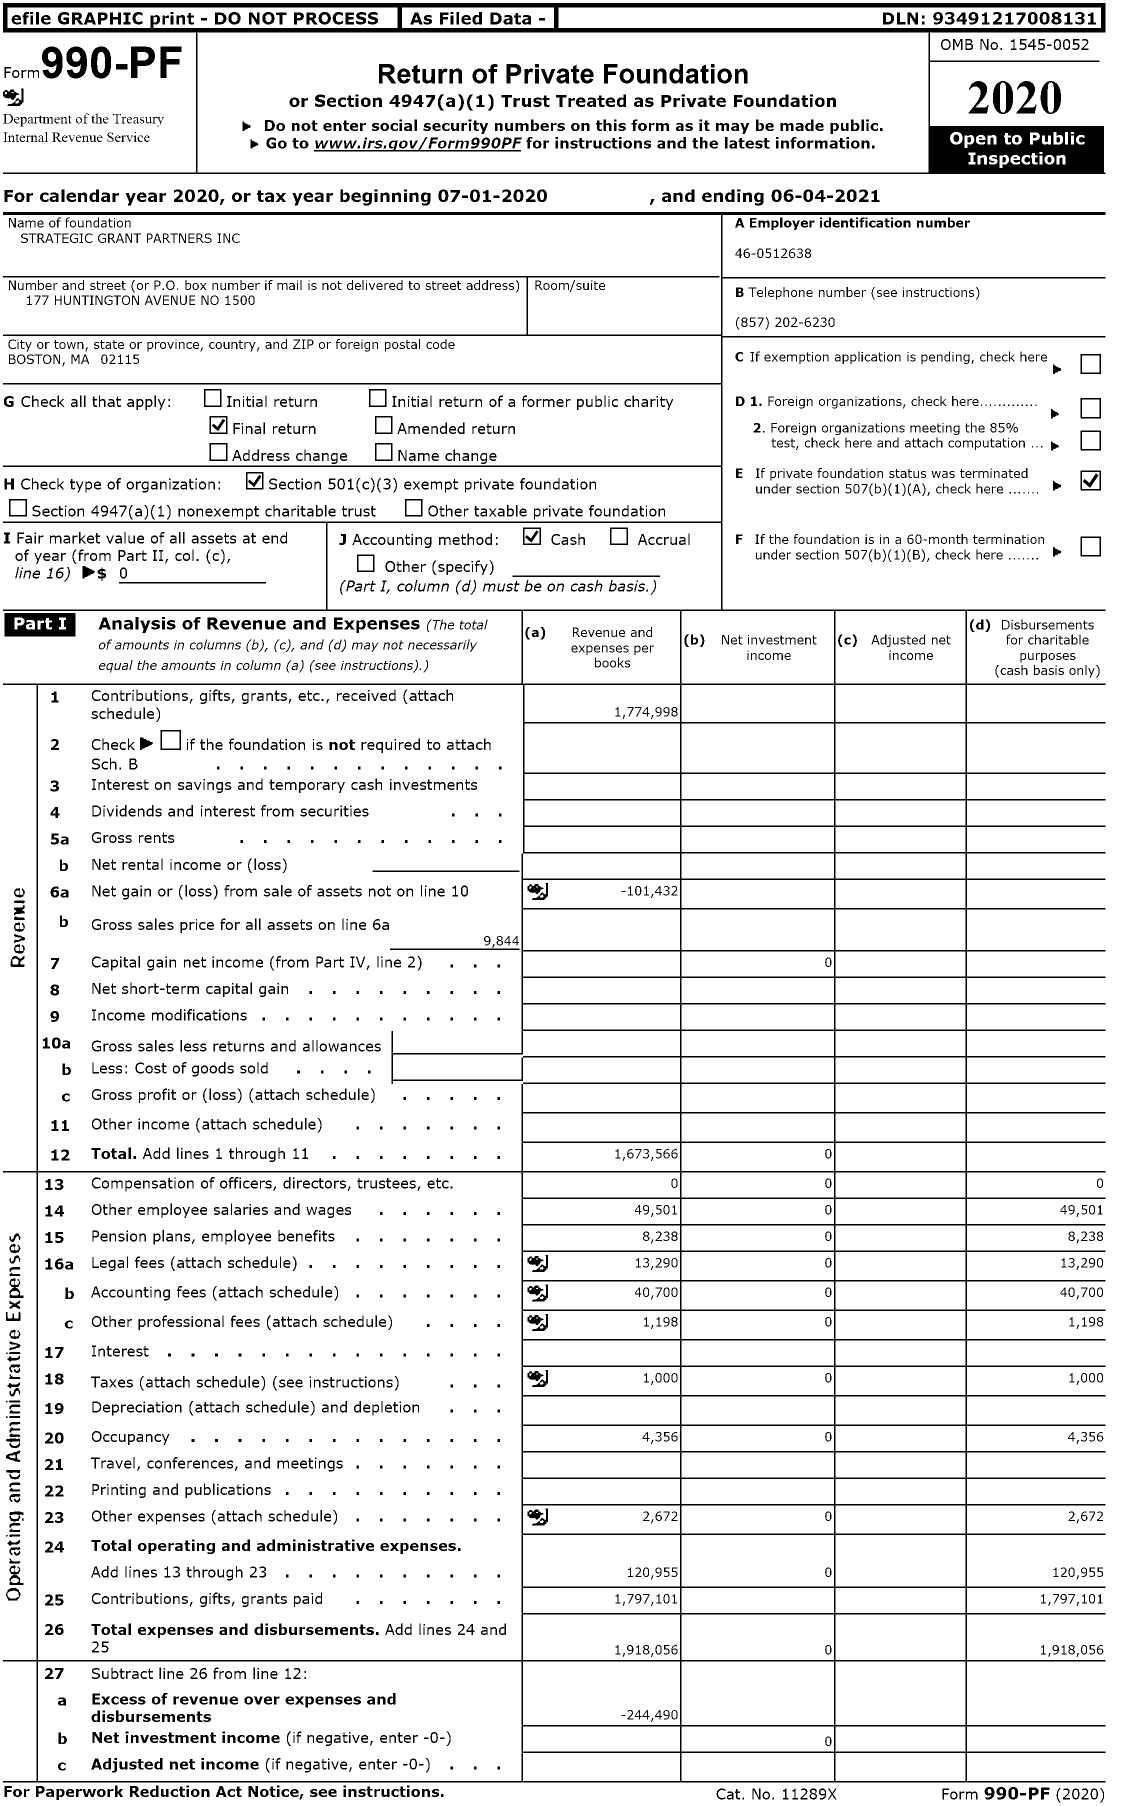 Image of first page of 2020 Form 990PF for Strategic Grant Partners (SGP)